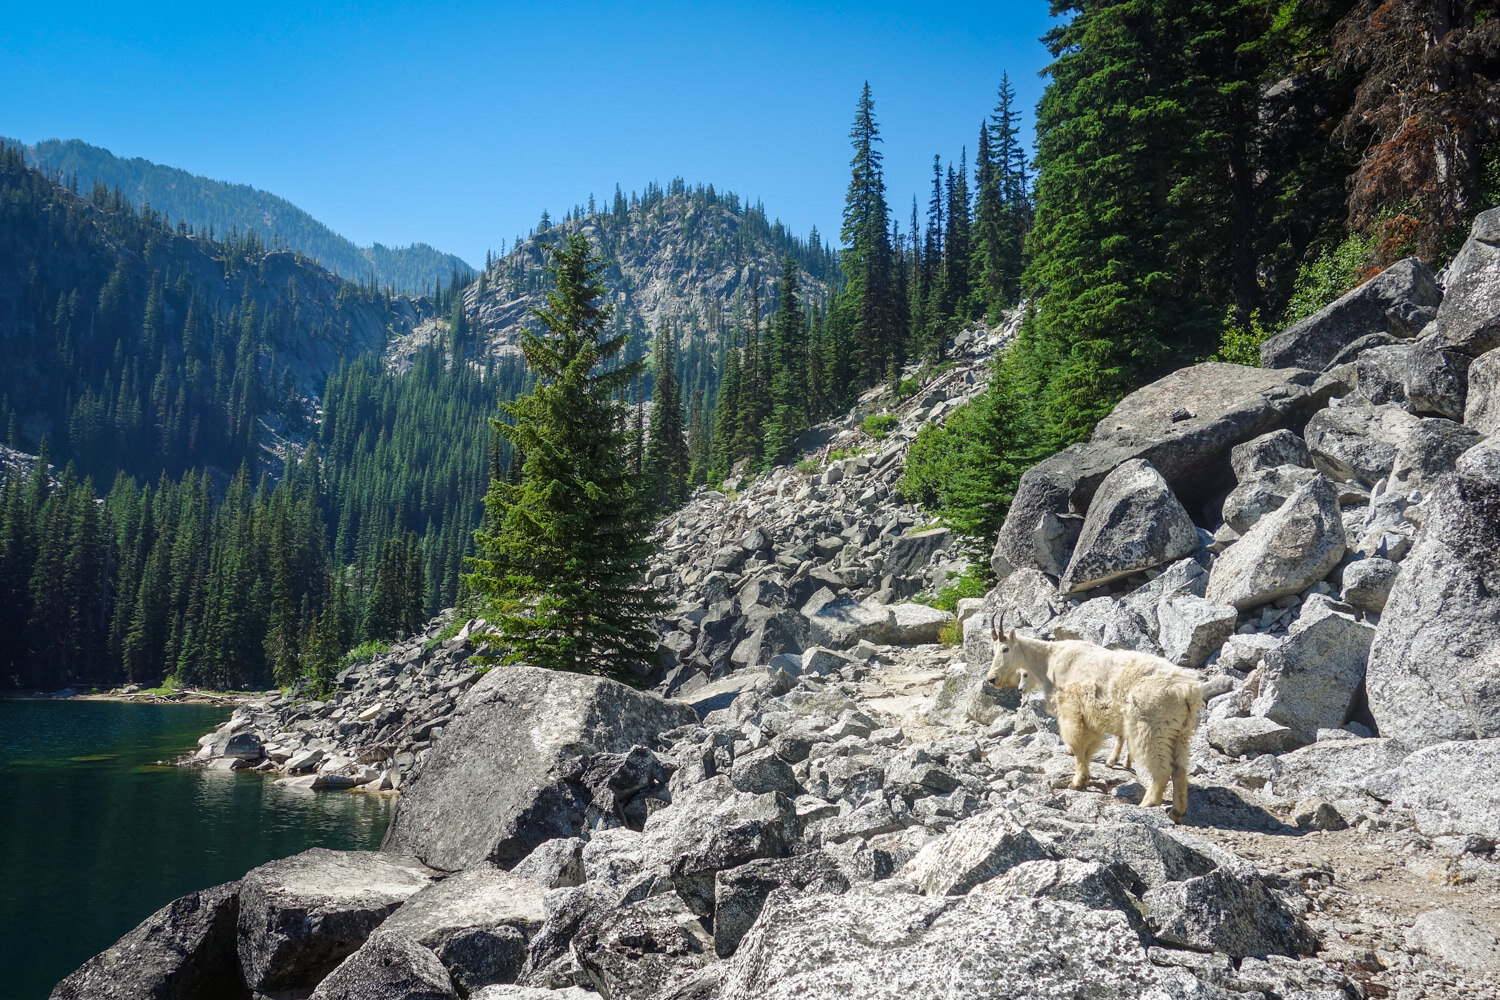 Mountain Goats are beautiful, but don’t get in their way